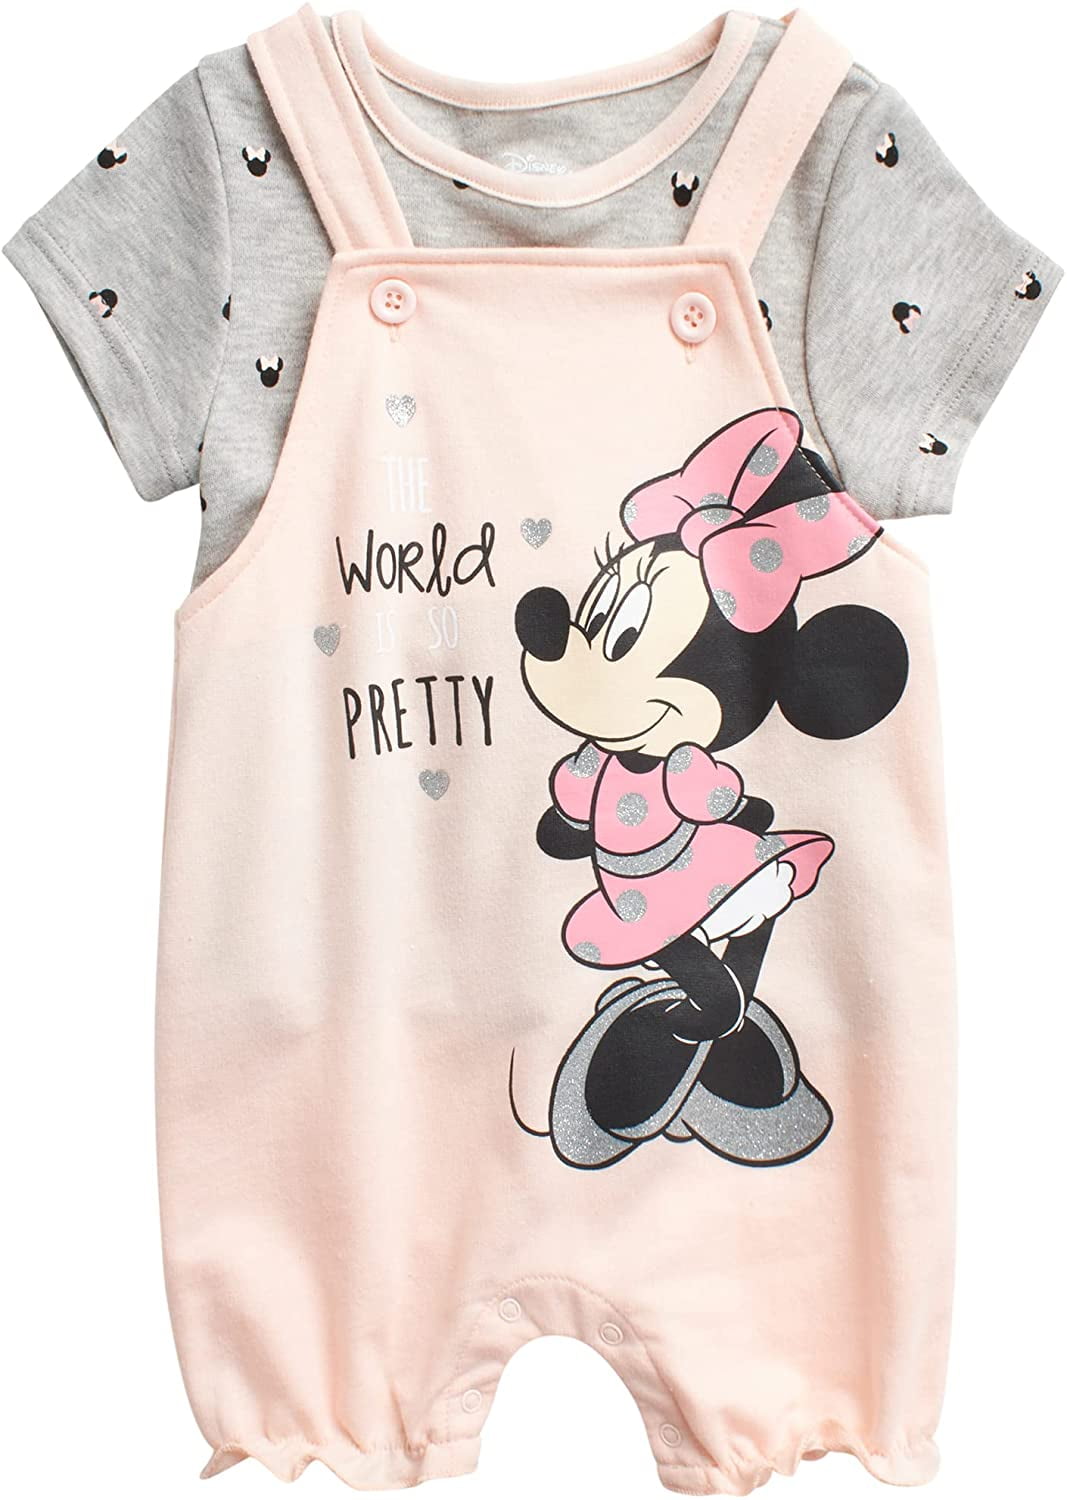 Details about   DISNEY Baby 3-6 Month Pooh or Minnie Short Sleeve Cotton Bodysuit Choice NWT 